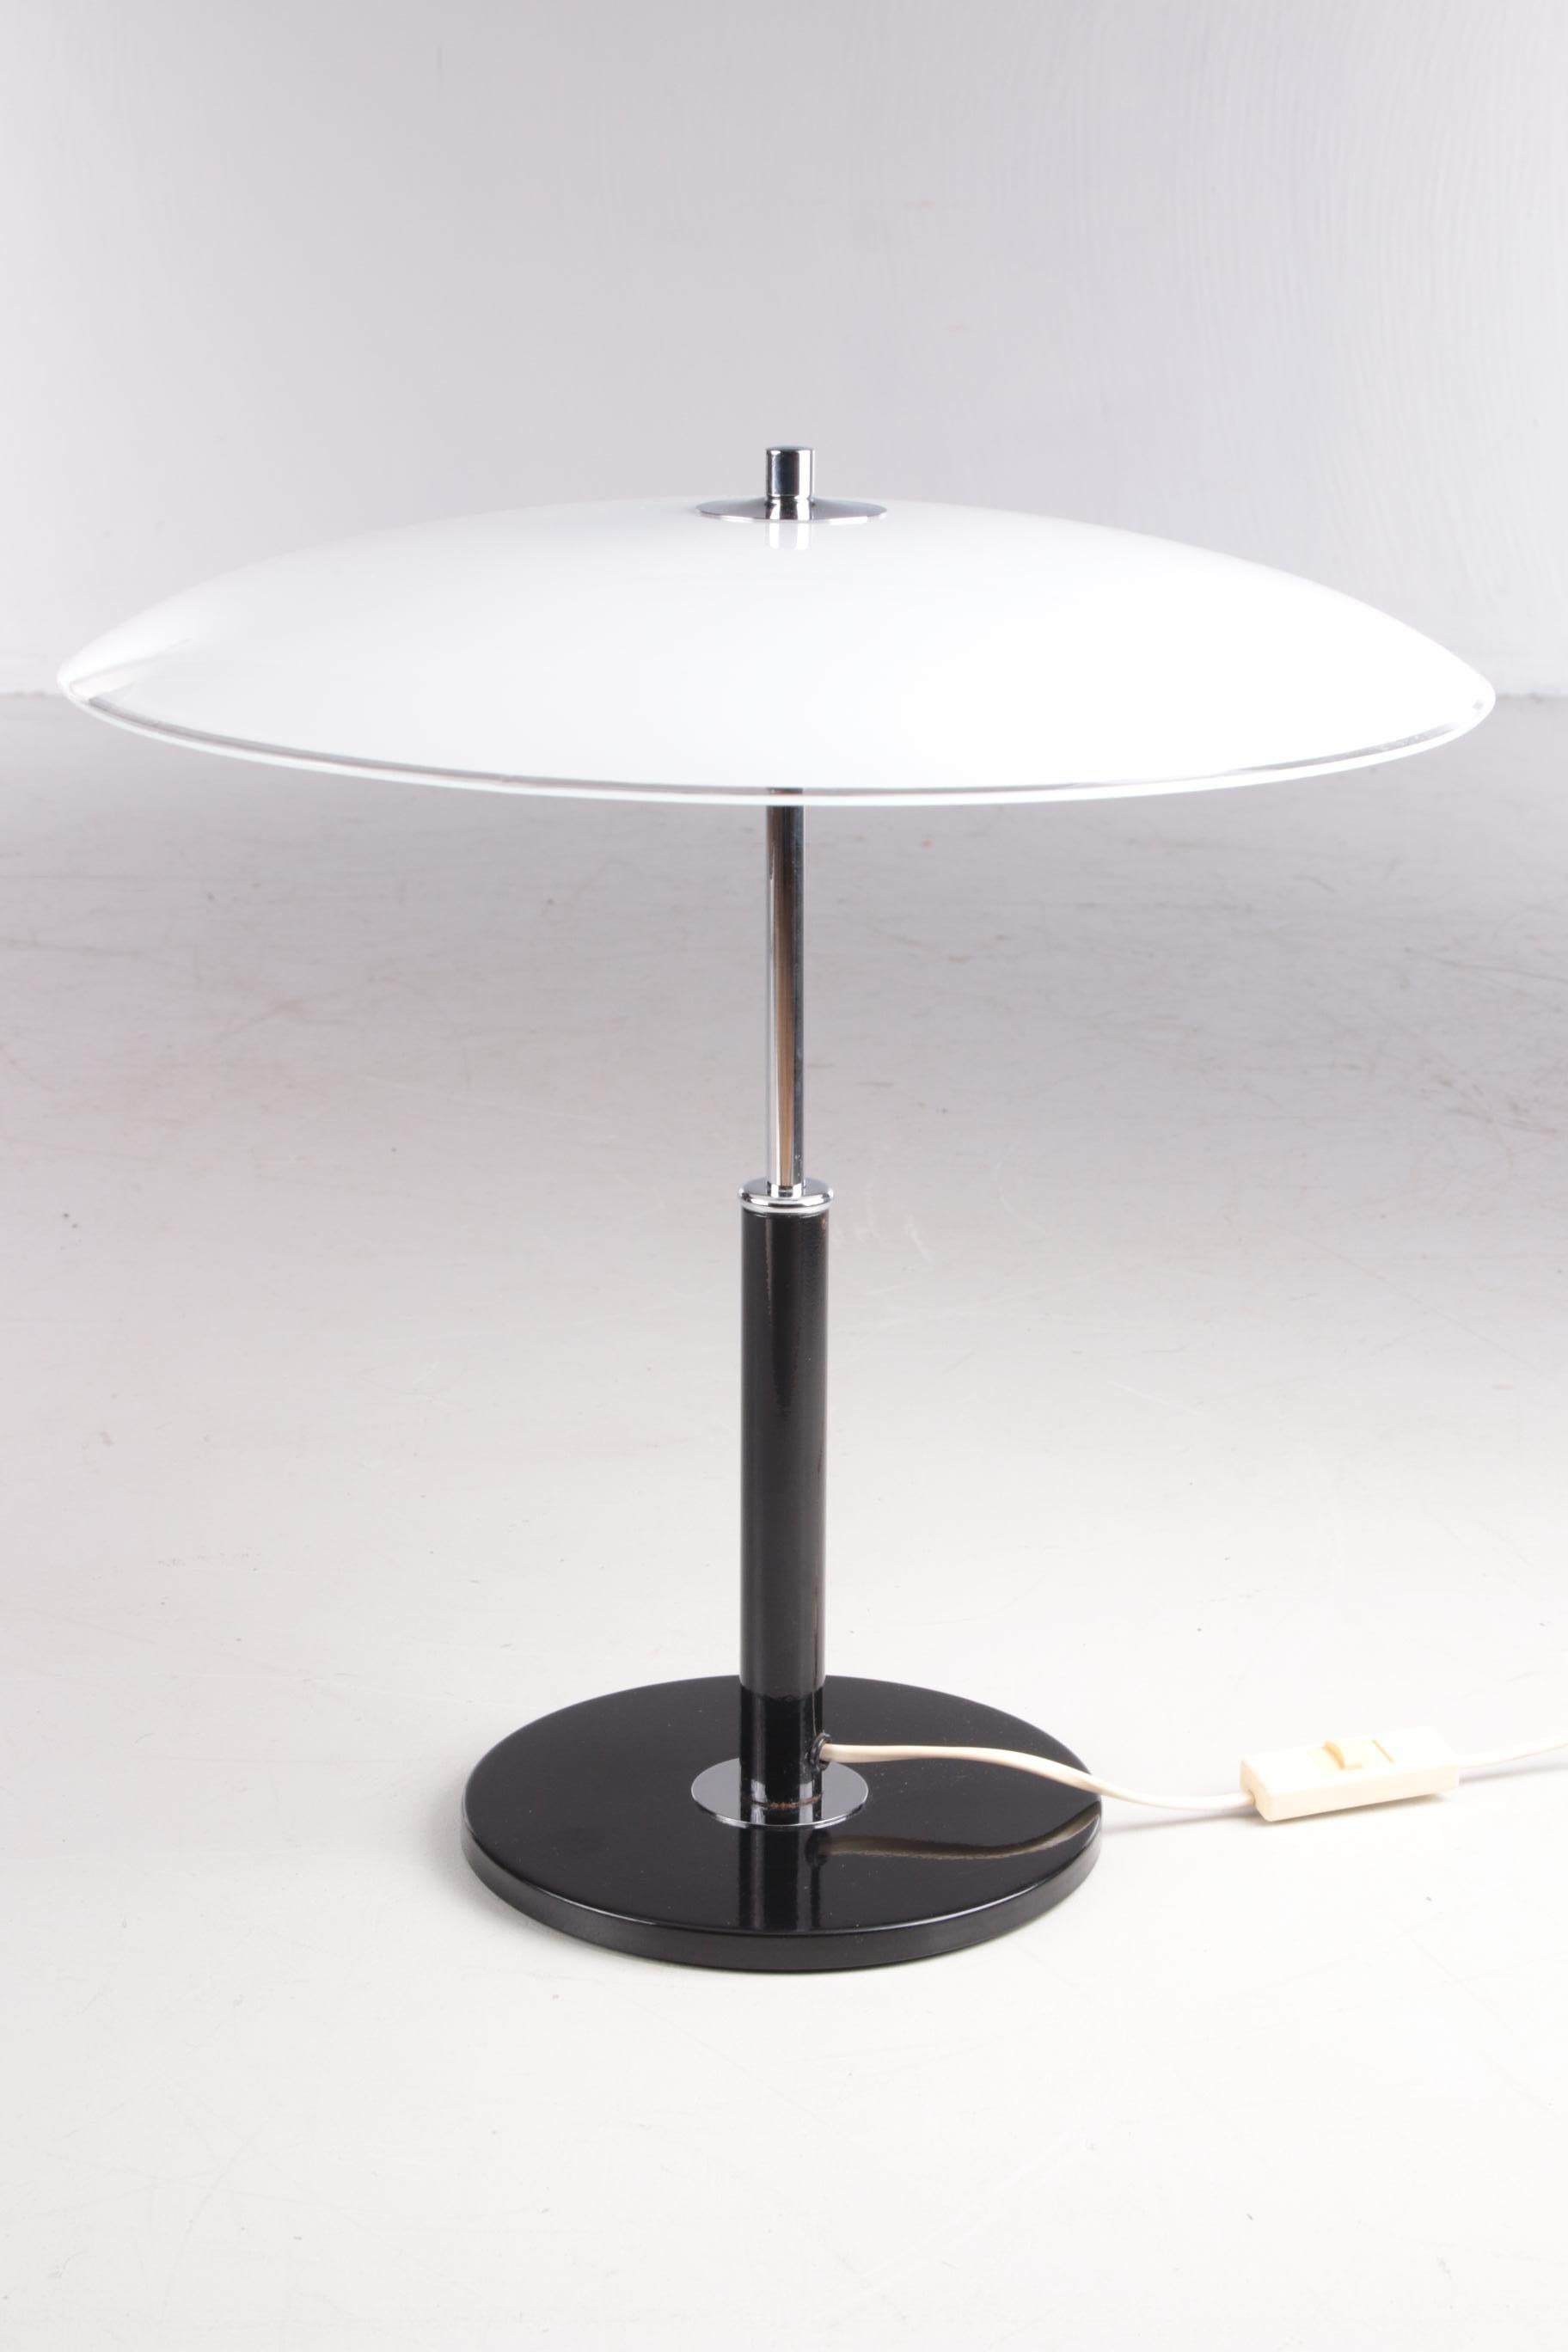 Vintage mushroom desk lamp model B8802 chrome with opal glass.


This is a very rare and highly sought after lamp designed in Sweden and produced for Ikea in the early 1990s. The lamp has three small lamp holders (E14) and can be fitted with LED